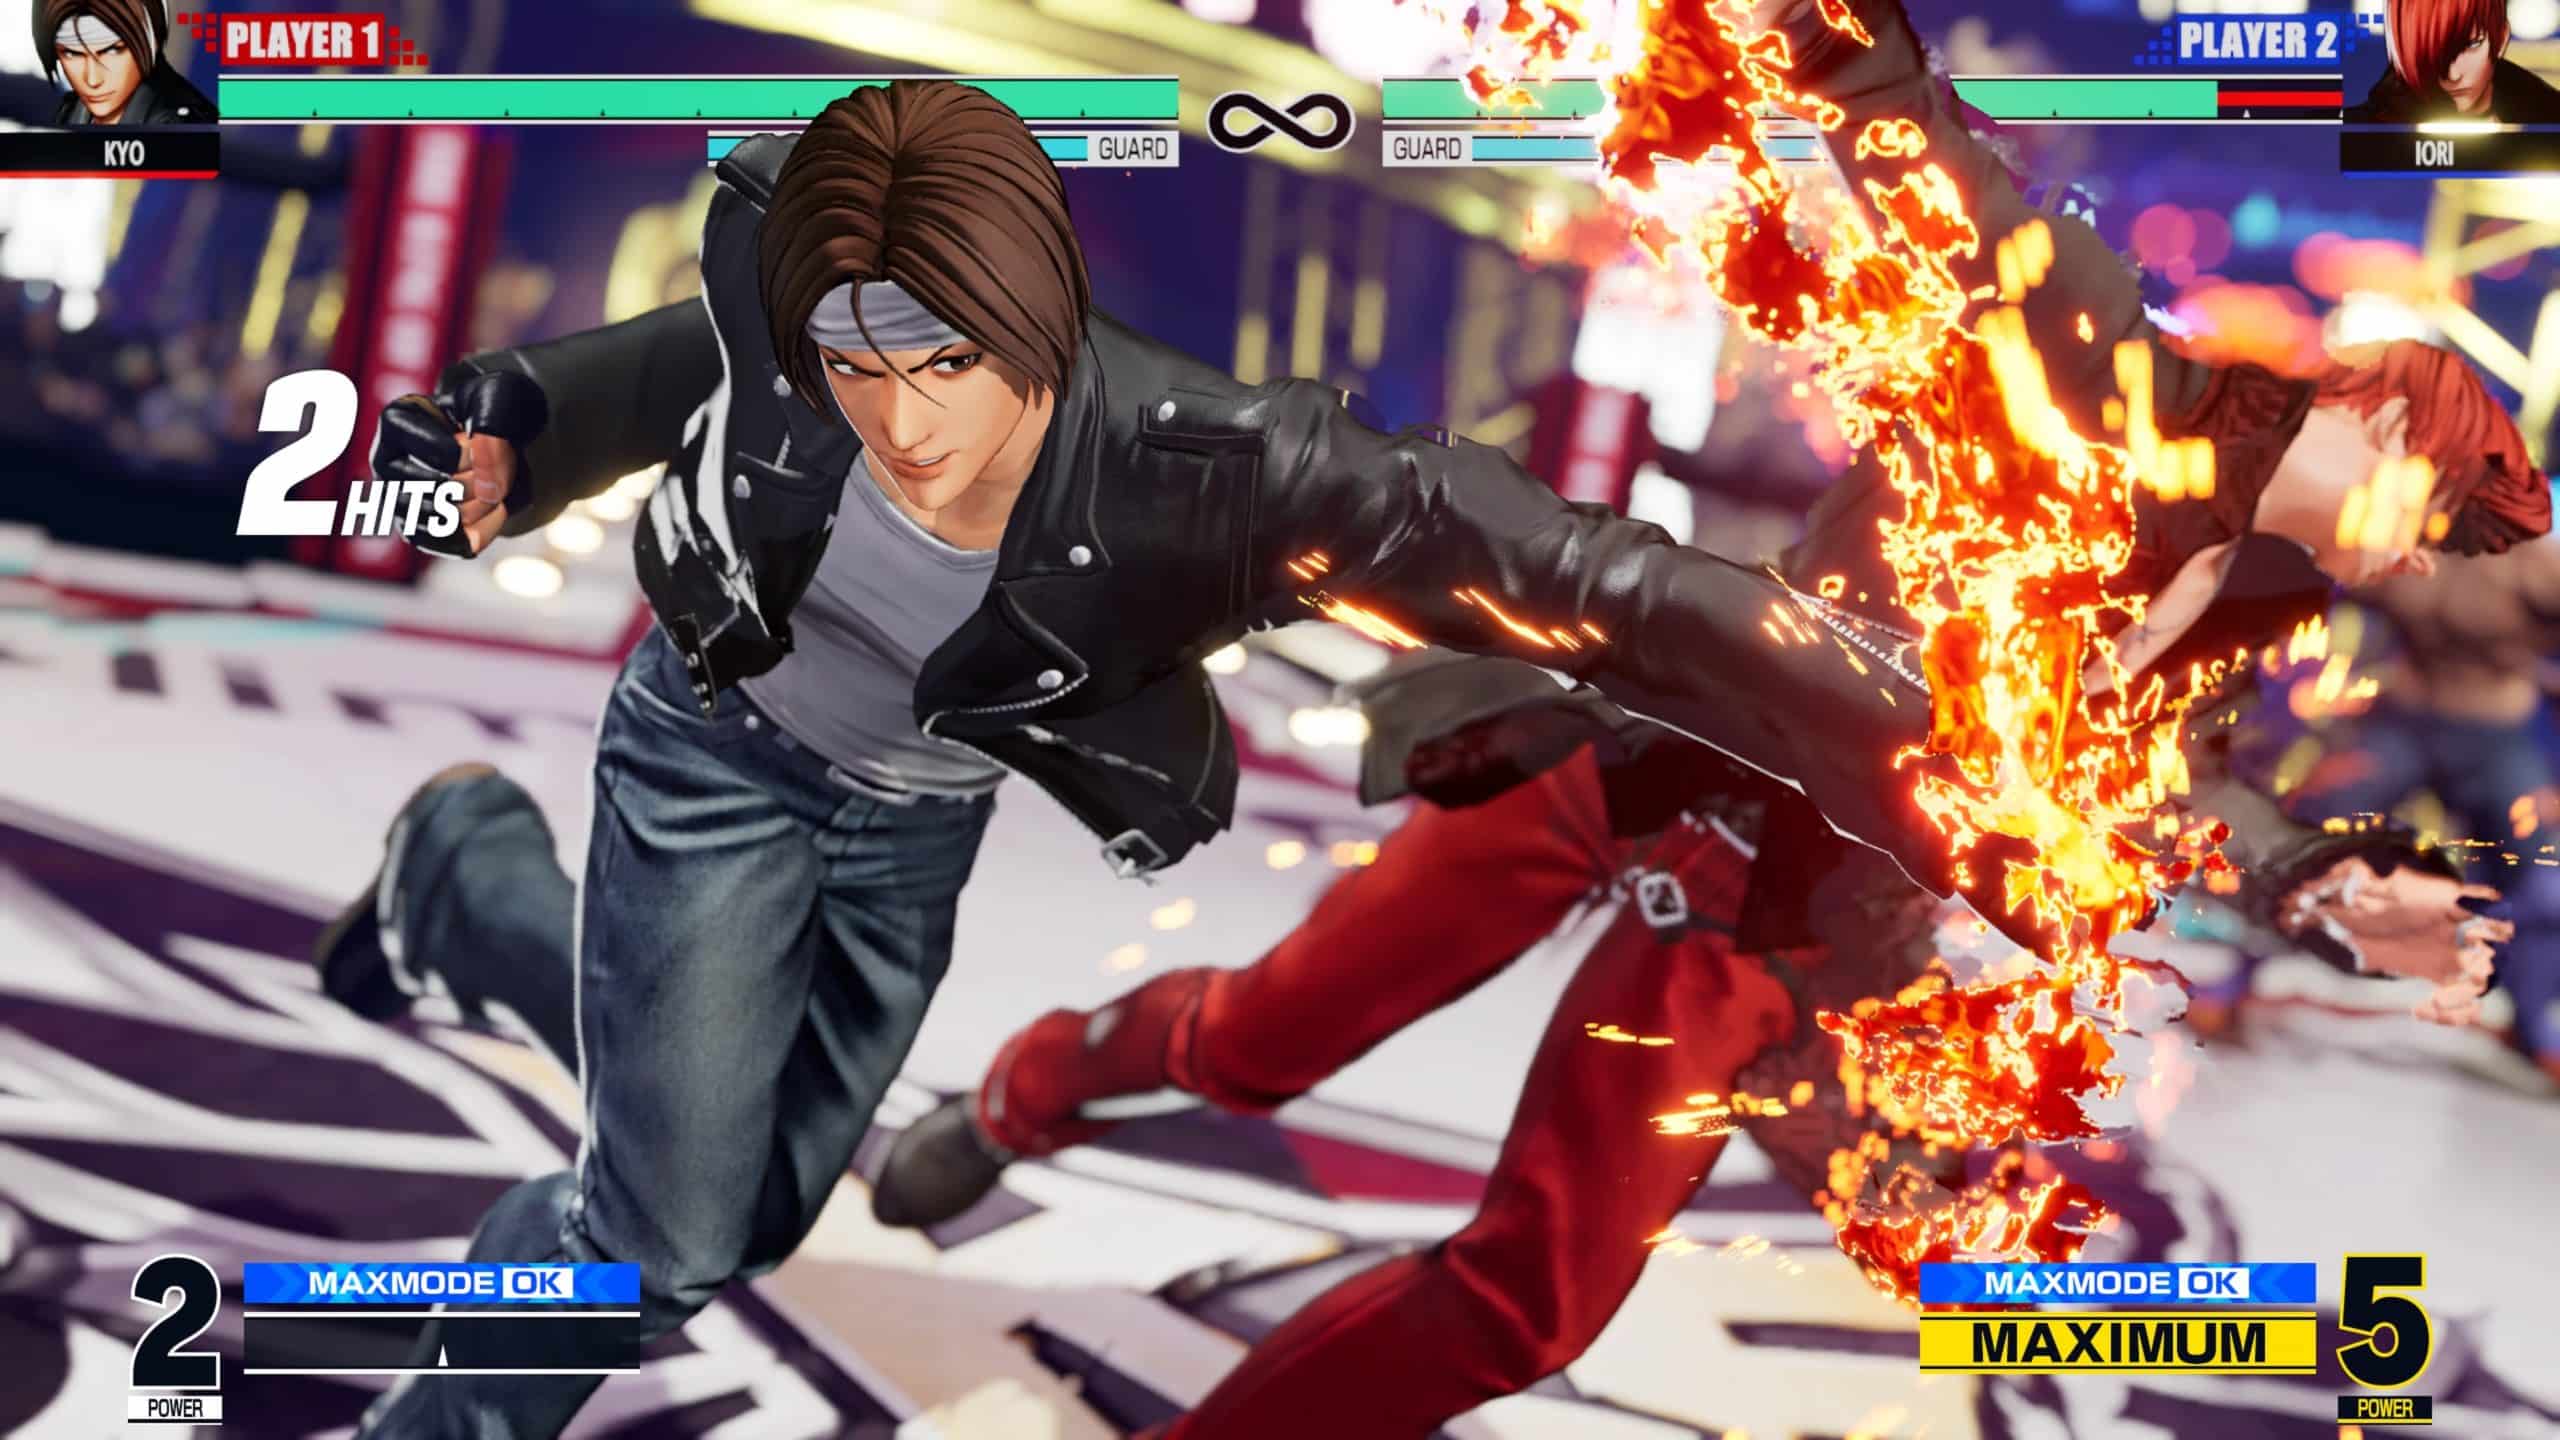 The King of Fighters XV Screenshot from Steam